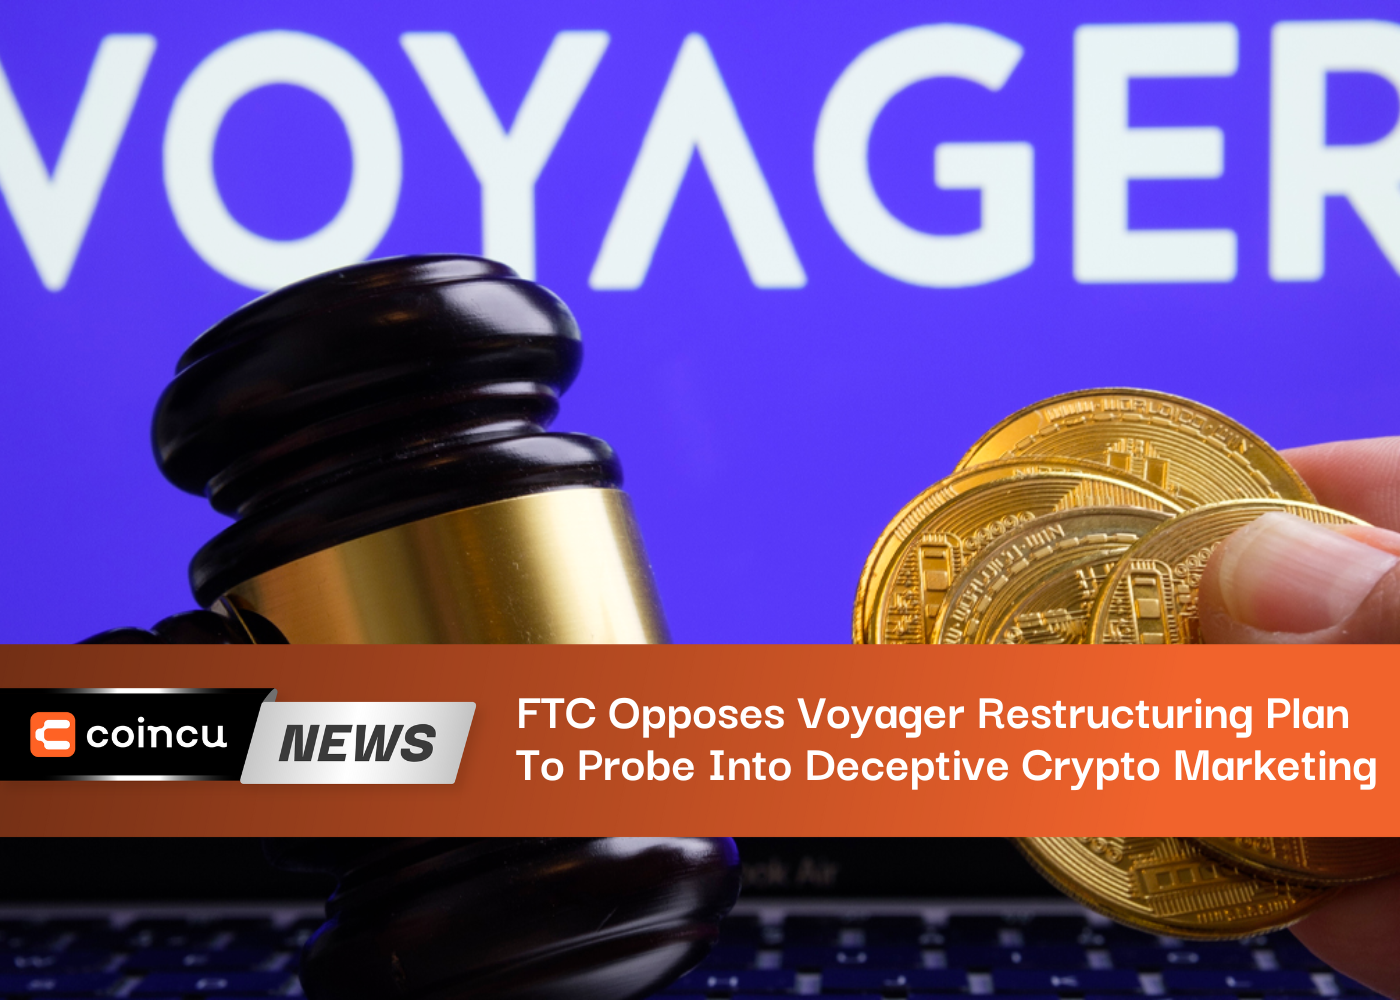 FTC Opposes Voyager Restructuring Plan To Probe Into Deceptive Crypto Marketing